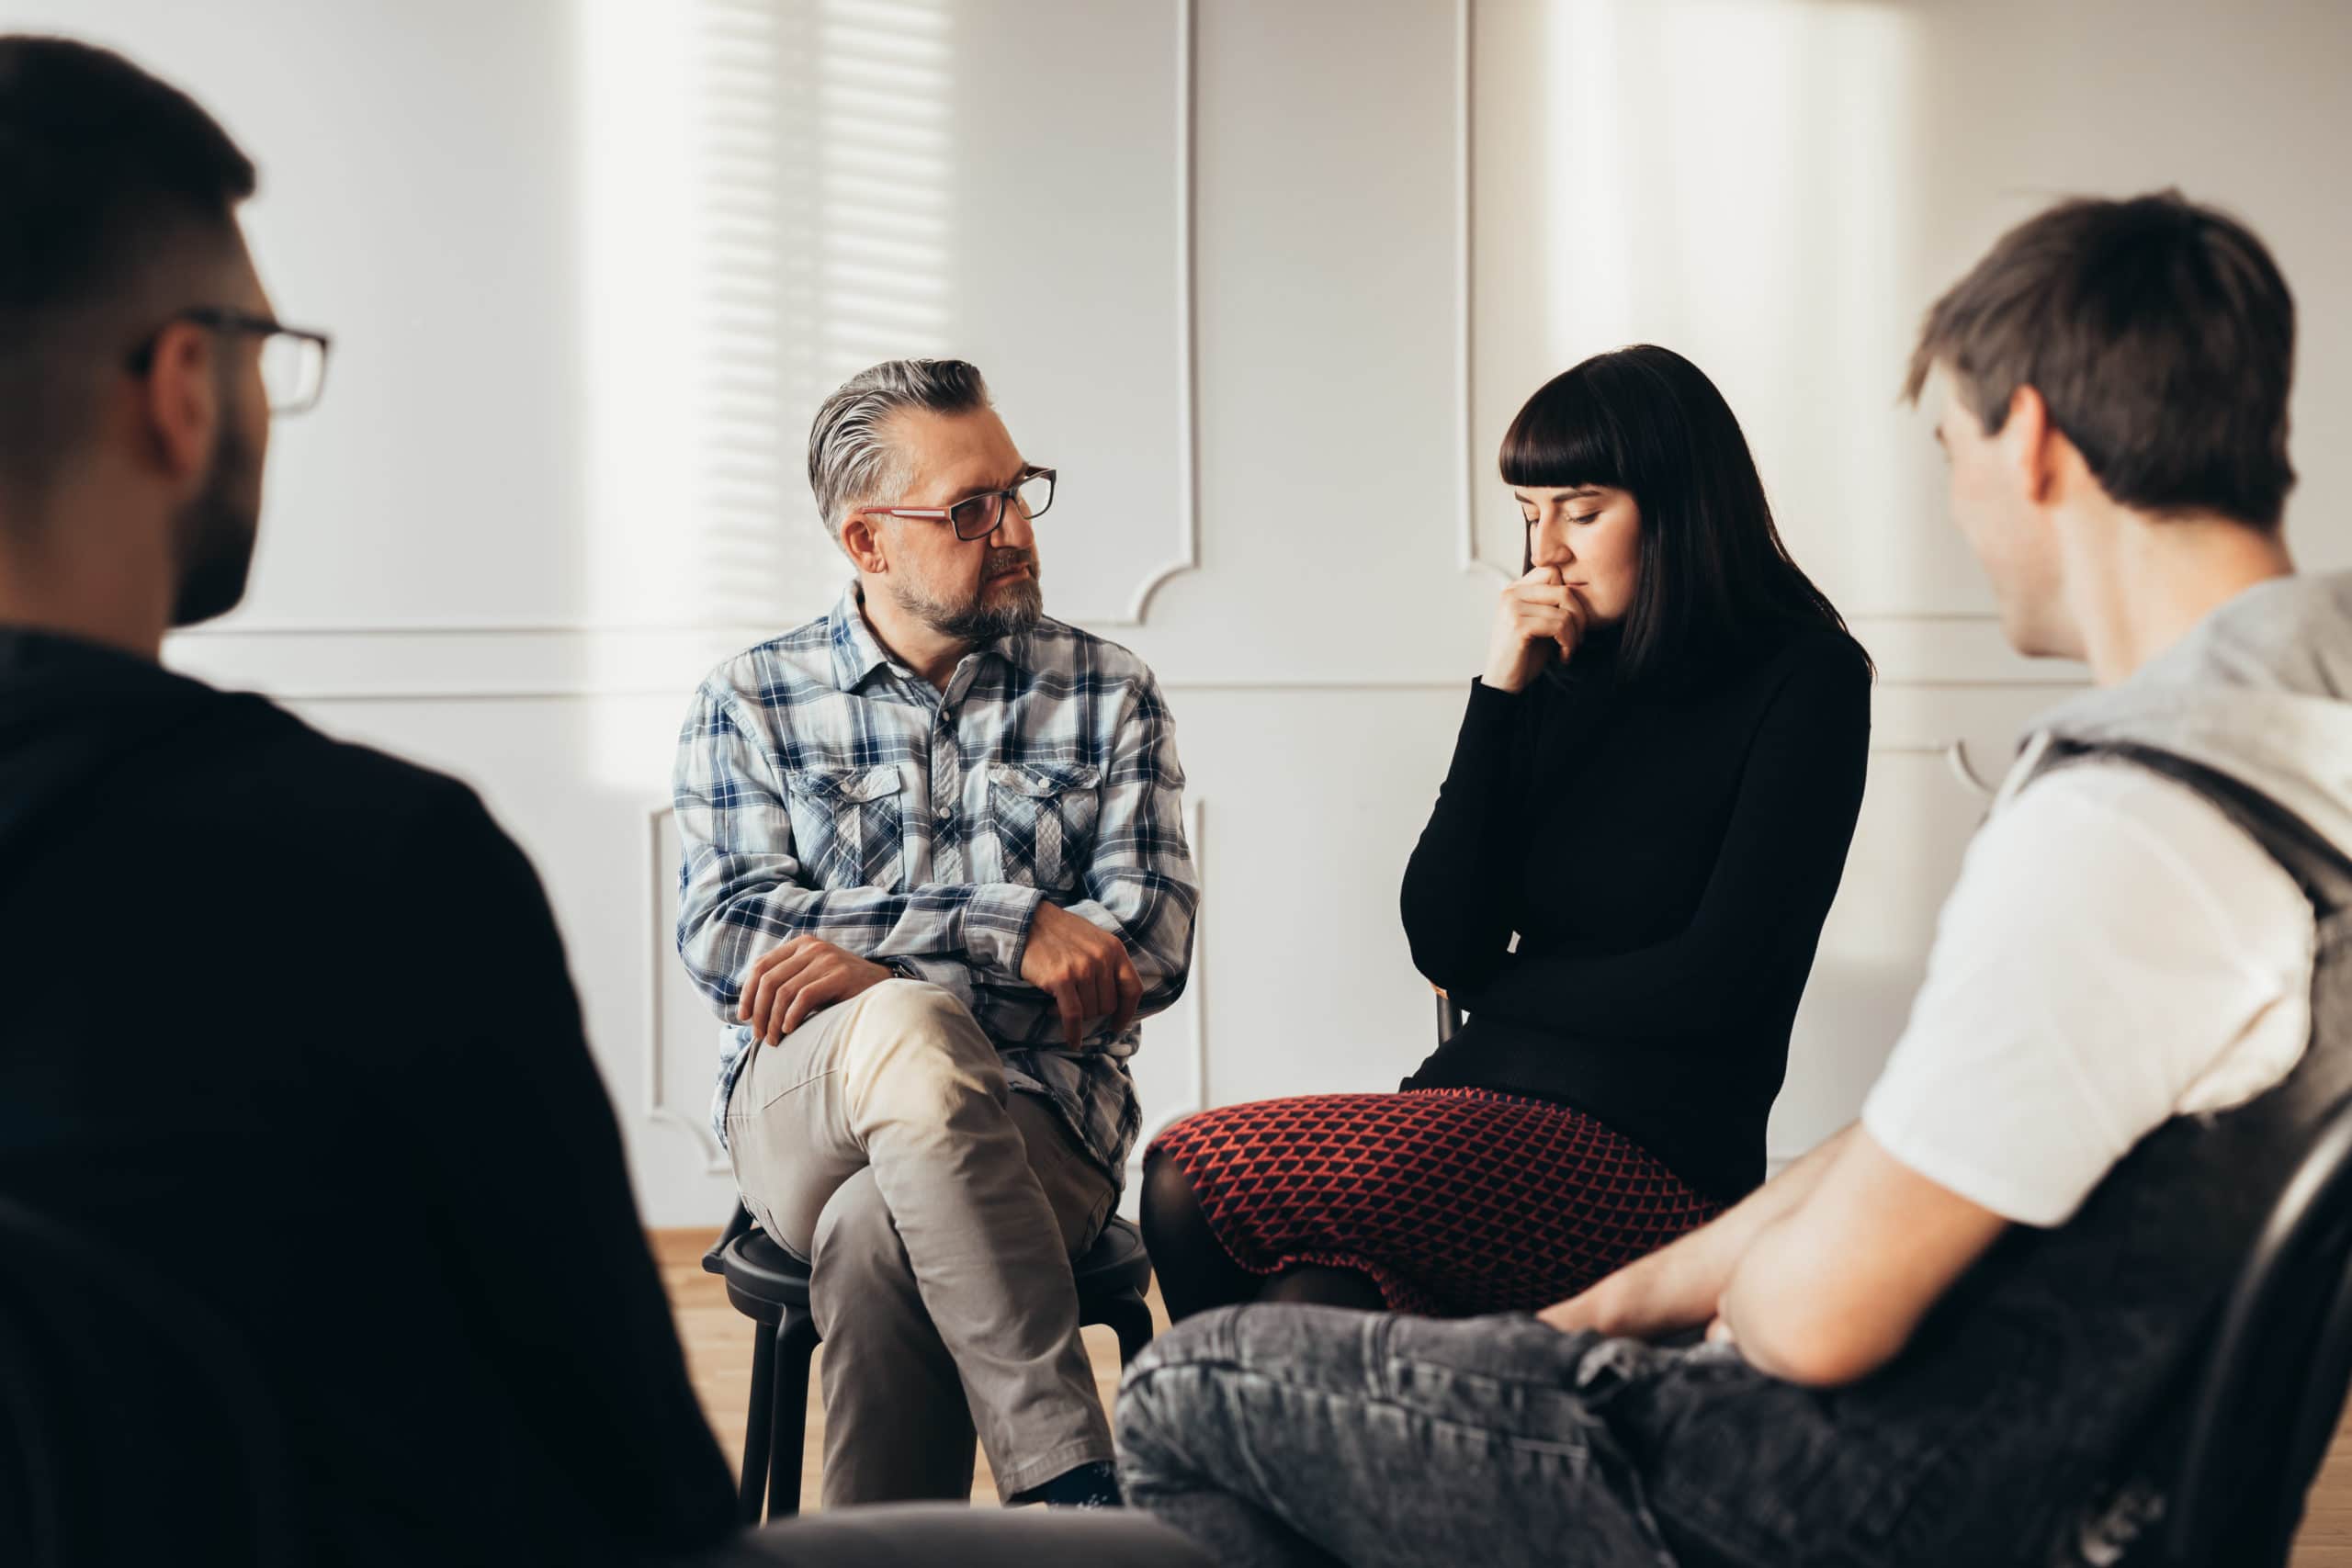 Does Outpatient Counseling For Drug Addiction Work?